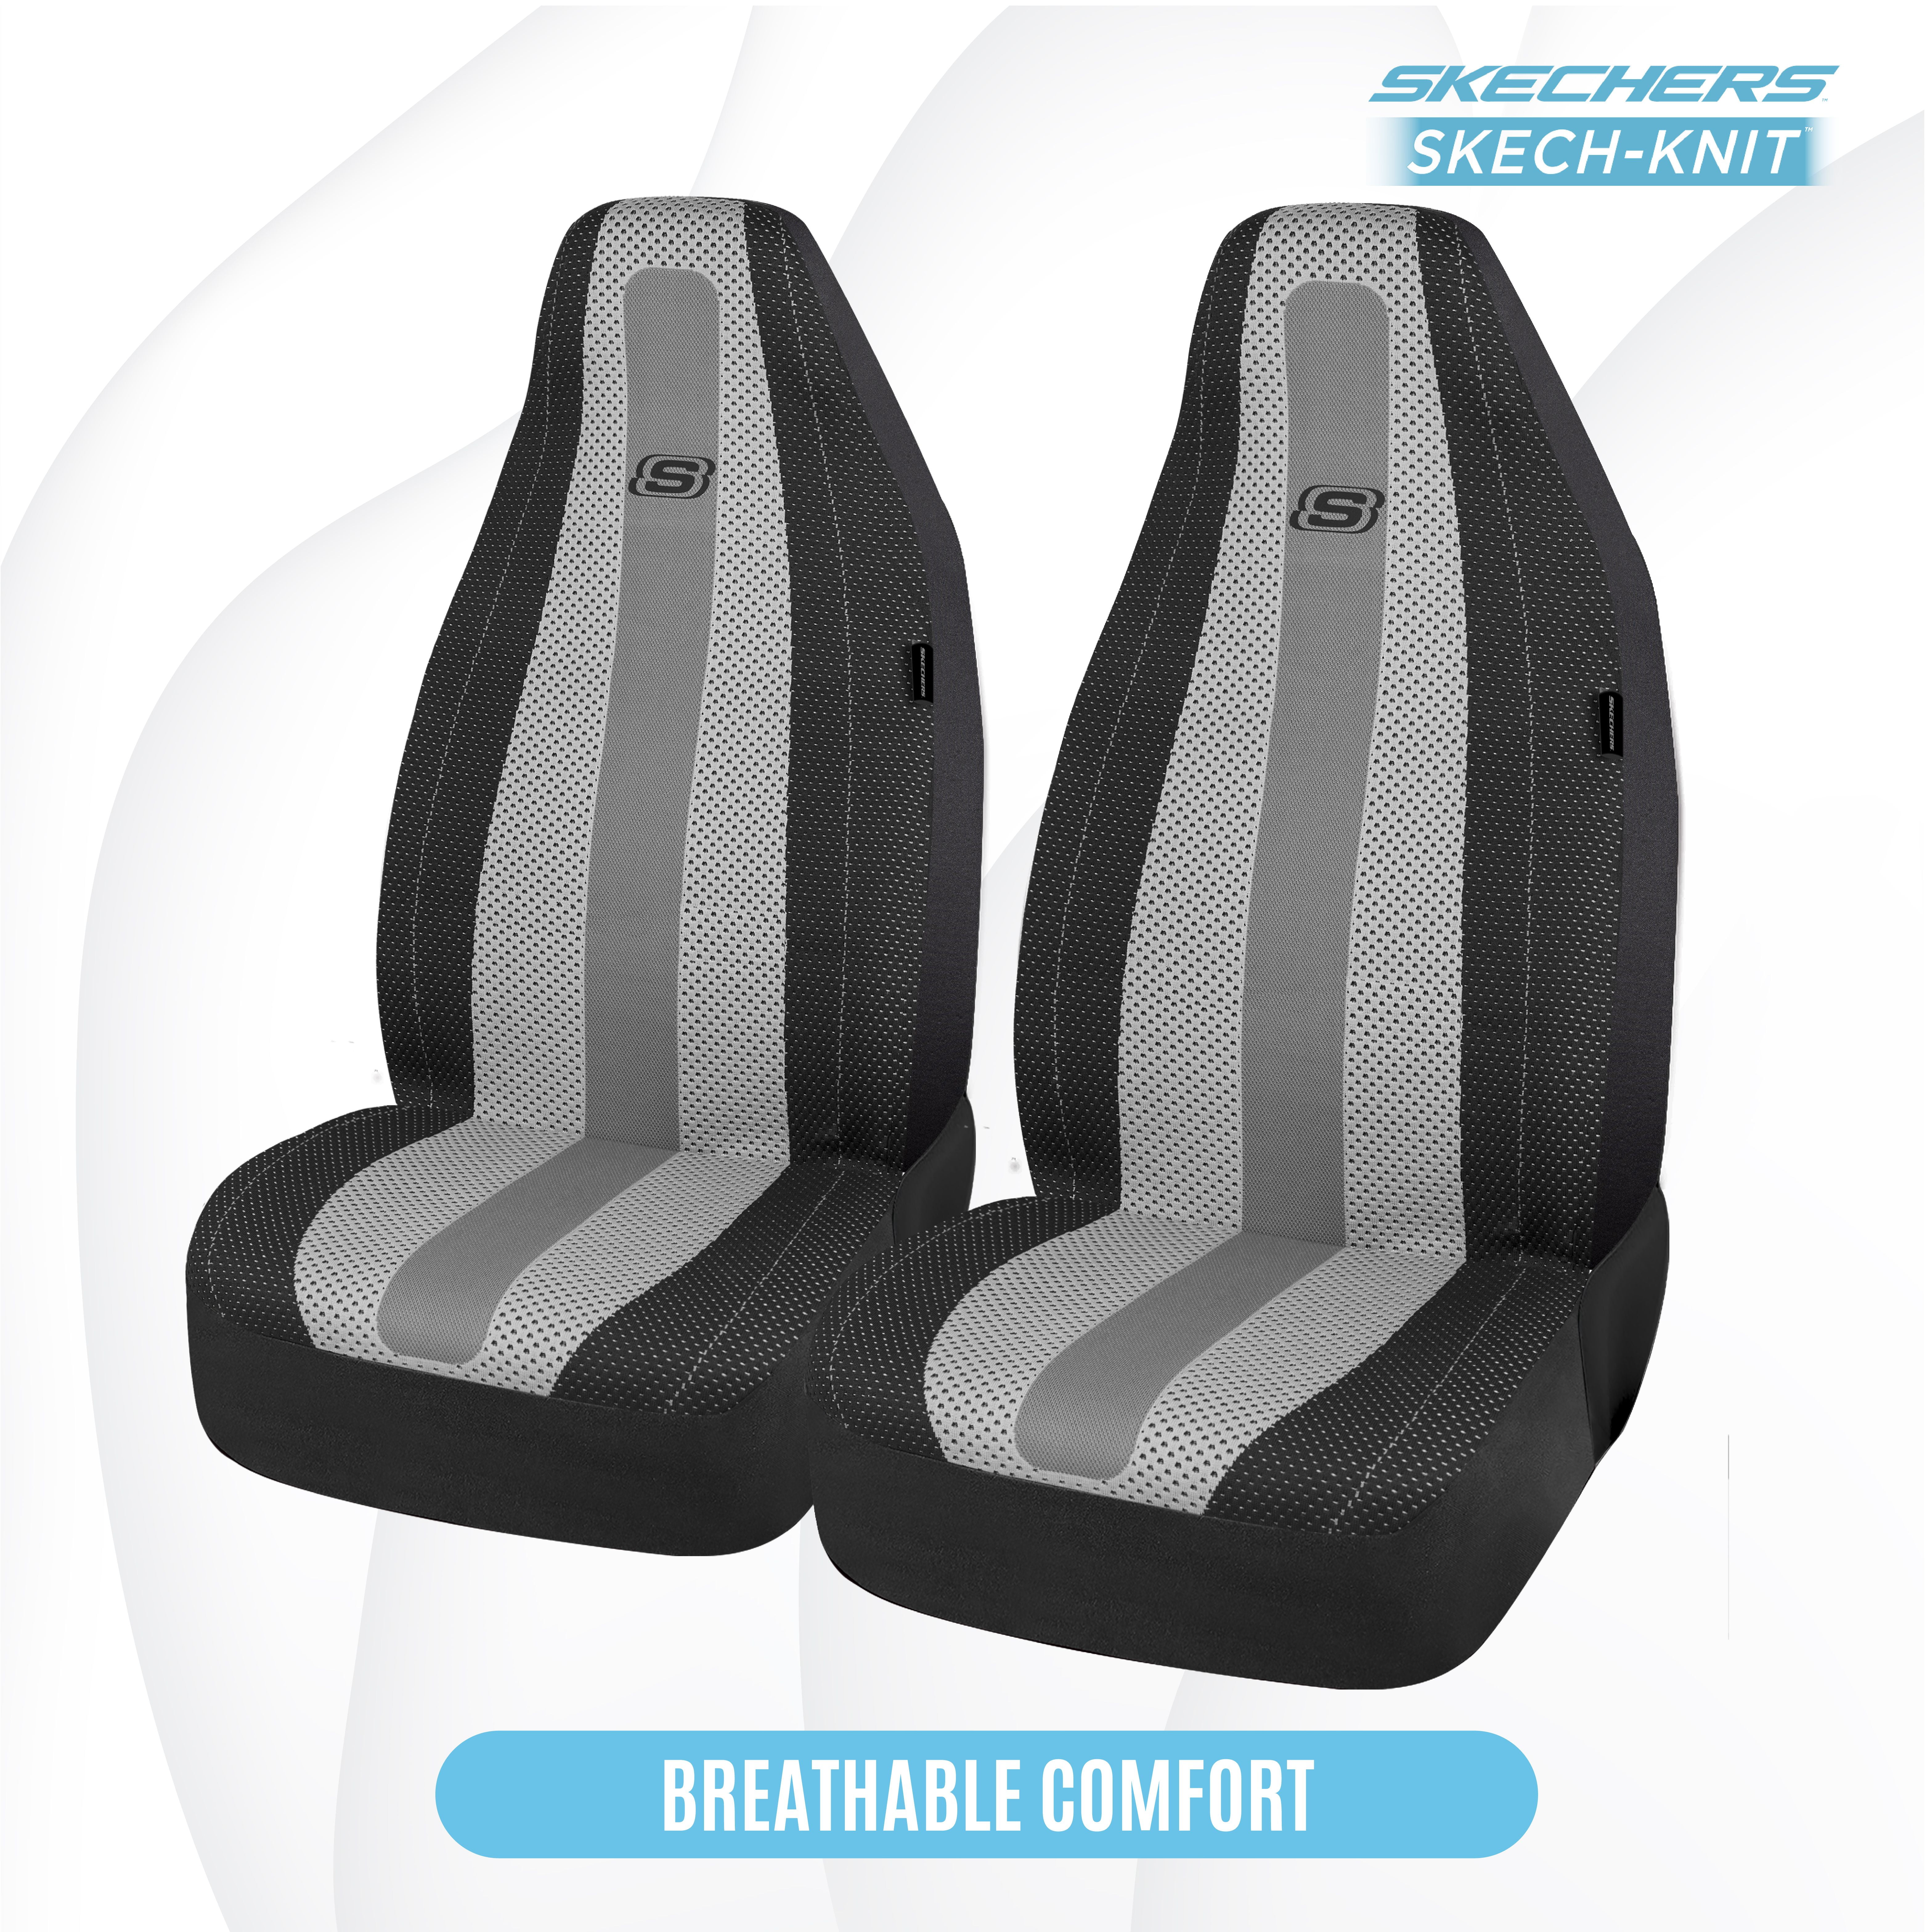 Buy Ford Fiesta Car Seat Covers Online India